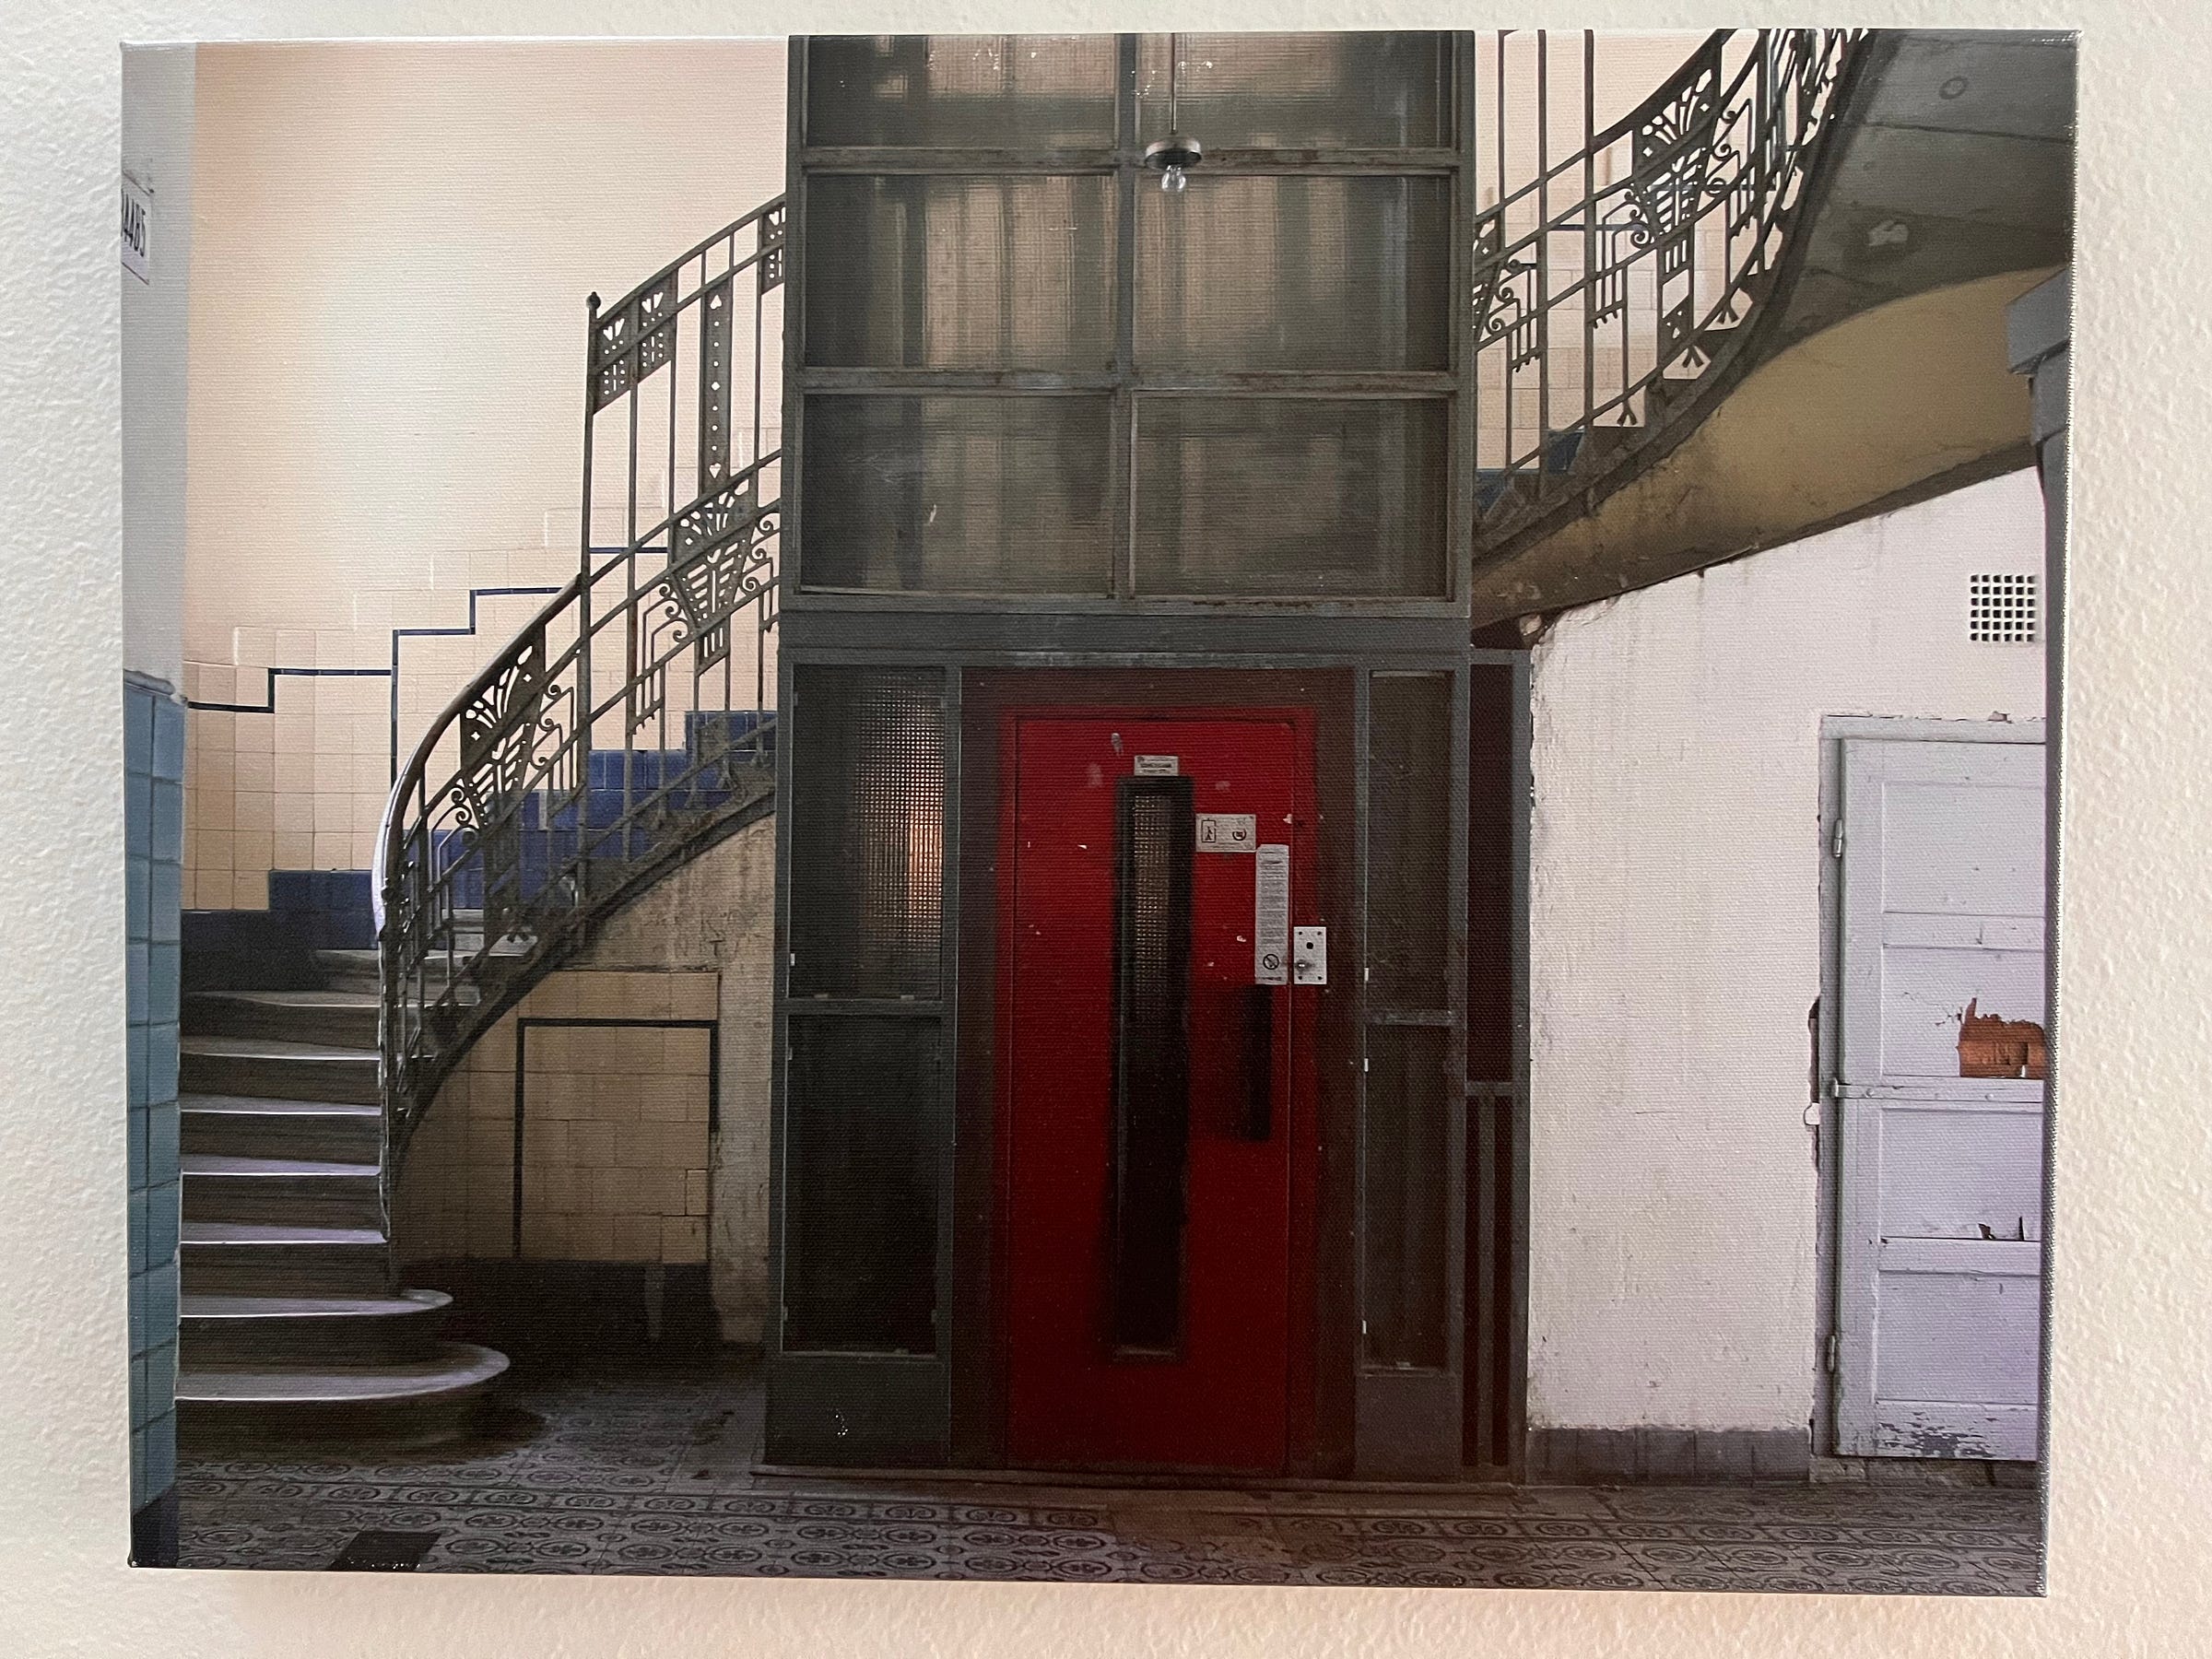 A photograph of a red door to an elevator in Budpest.